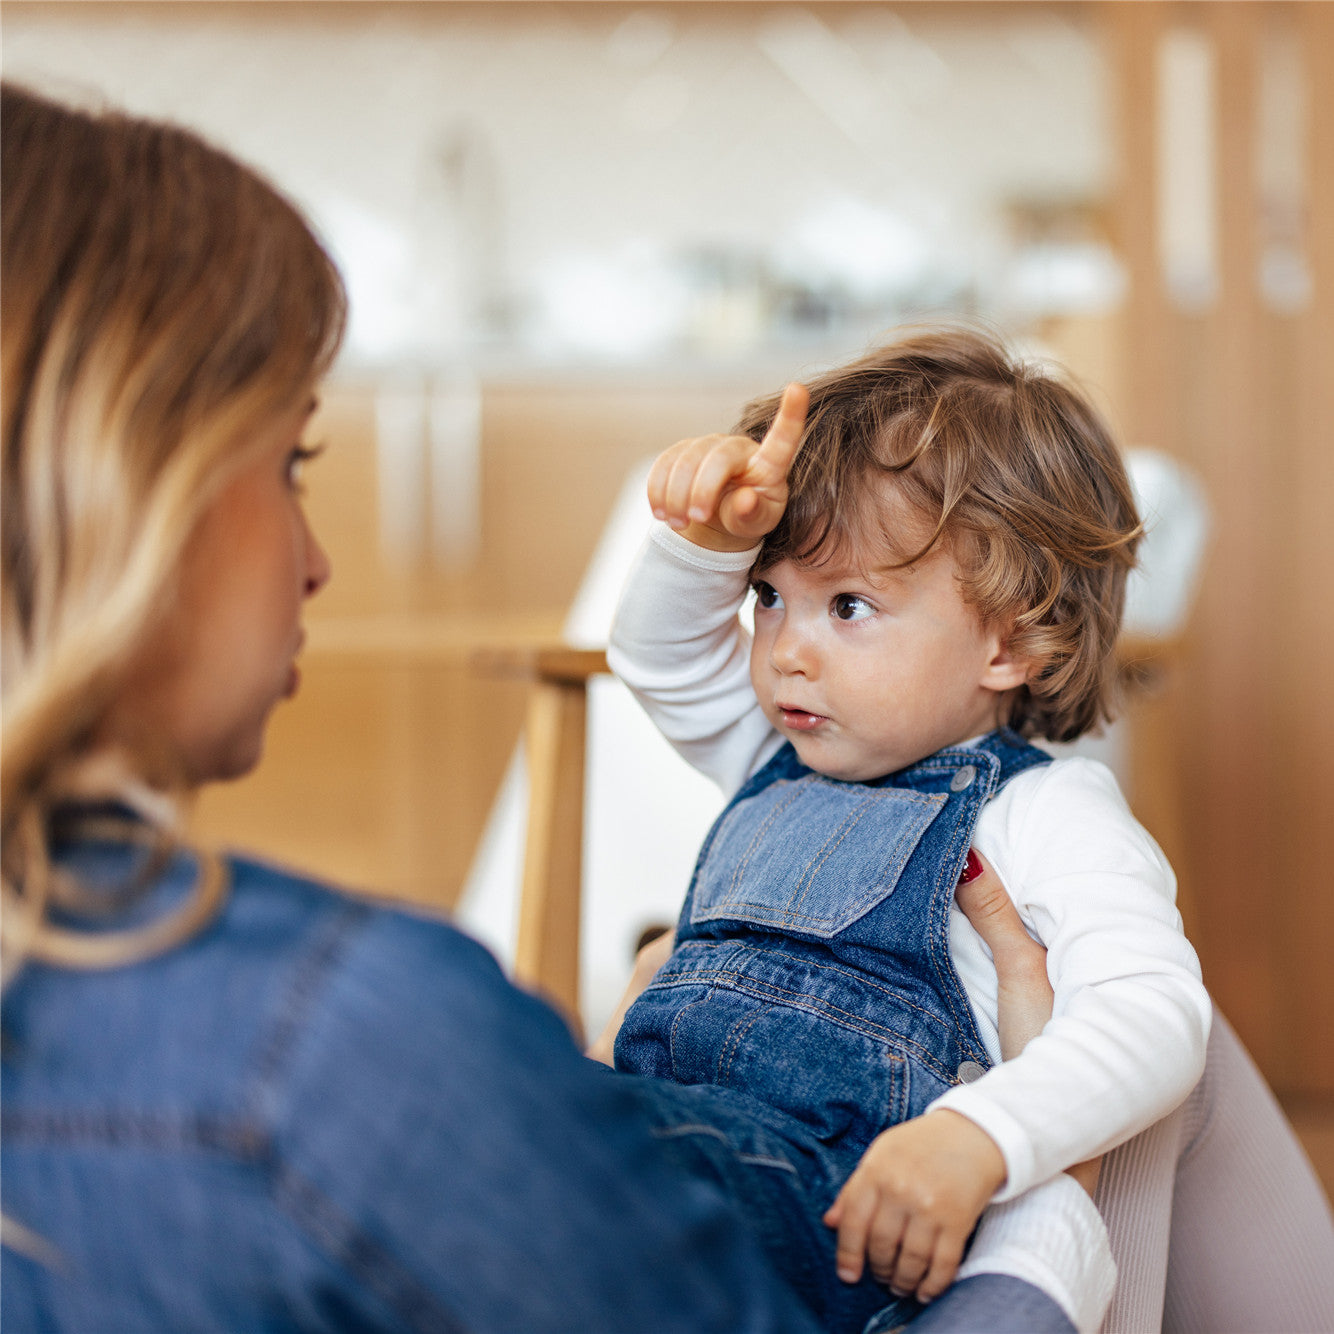 A toddler with curly blonde hair is talking with mom